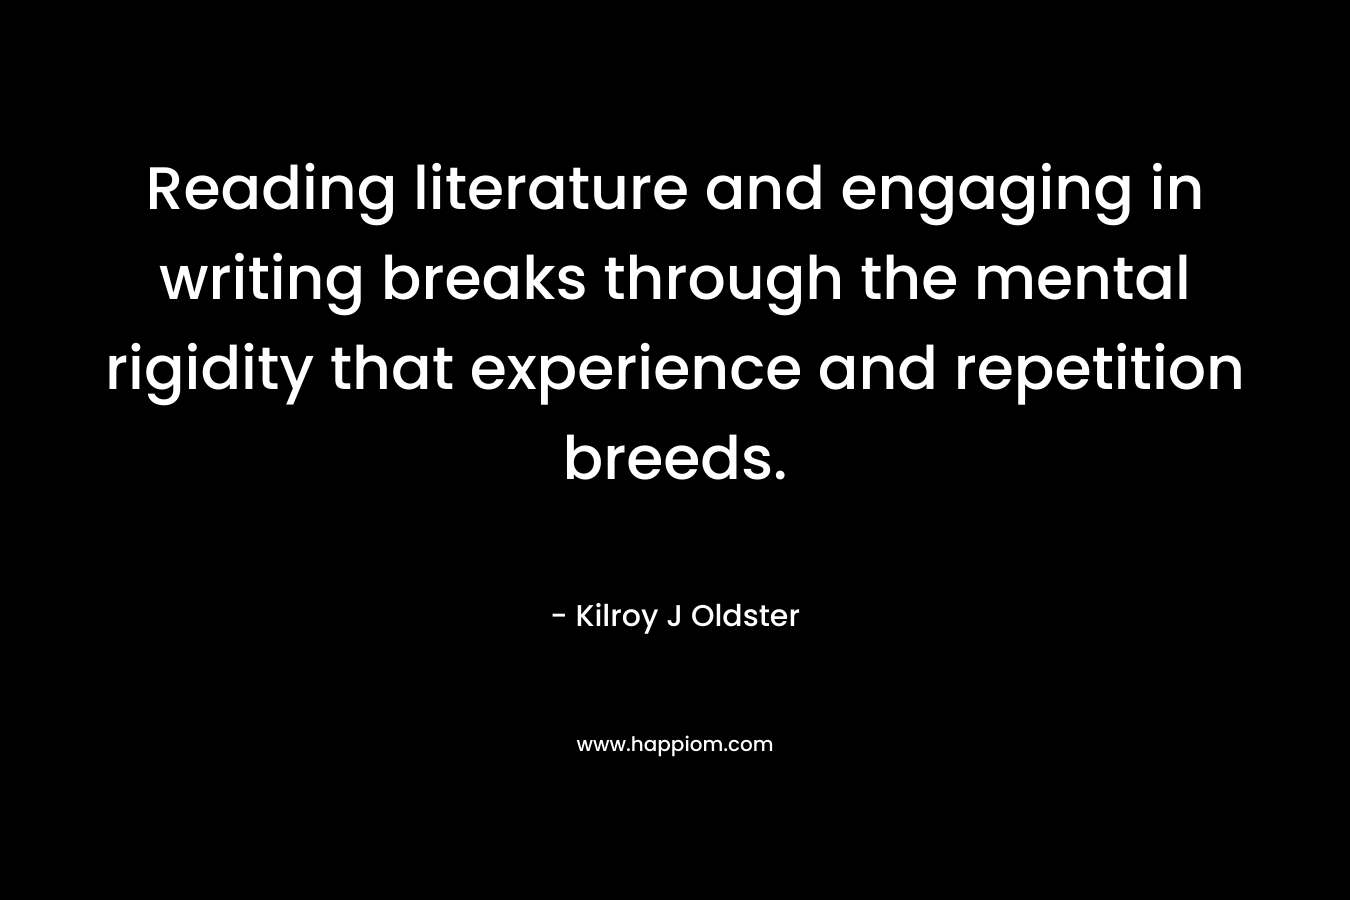 Reading literature and engaging in writing breaks through the mental rigidity that experience and repetition breeds.